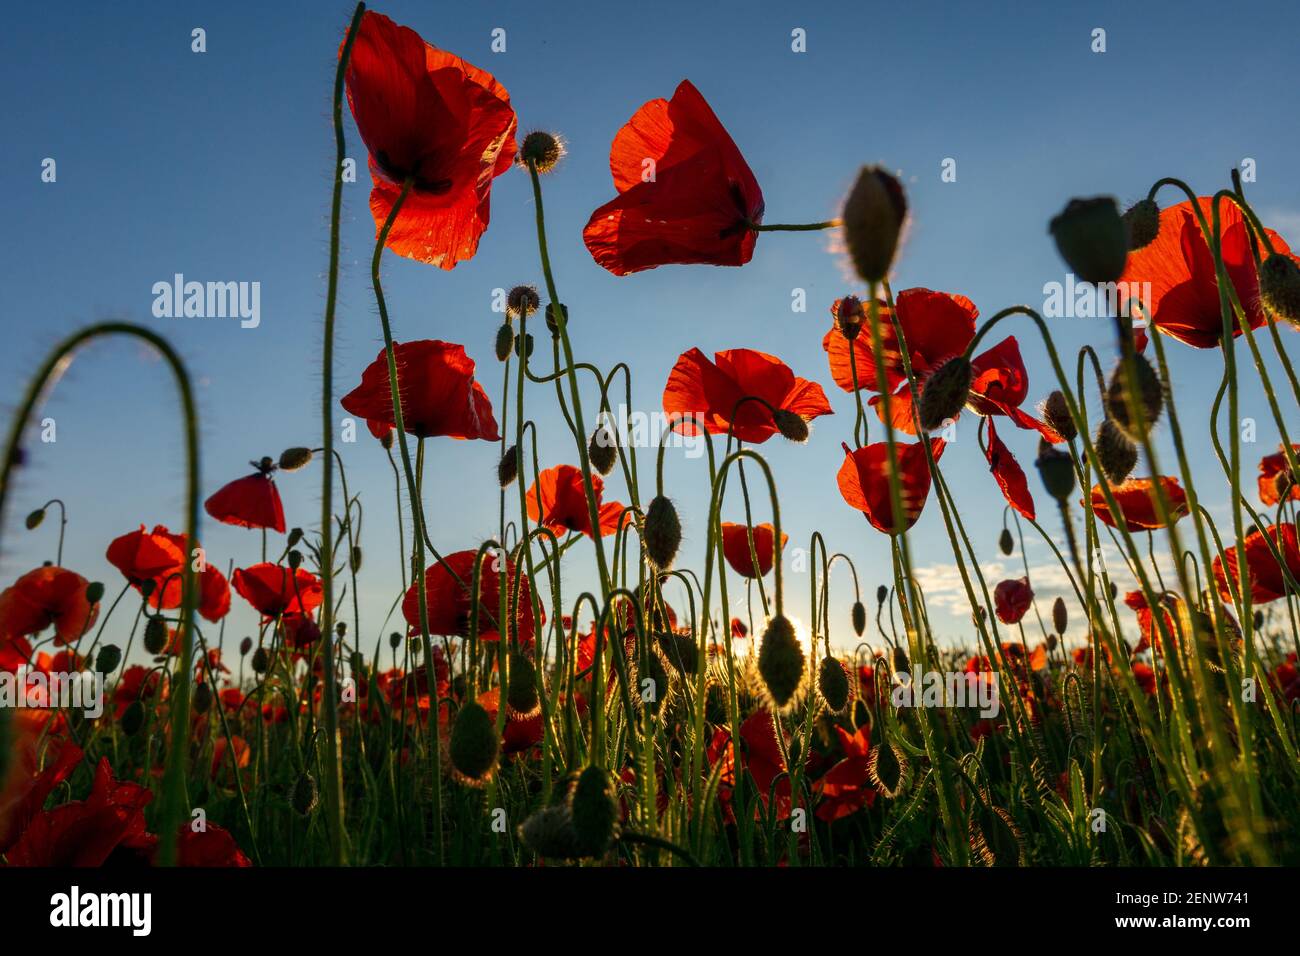 Flowers Red poppies blossom on wild field. Beautiful field red poppies with selective focus. Red poppies in soft light Stock Photo